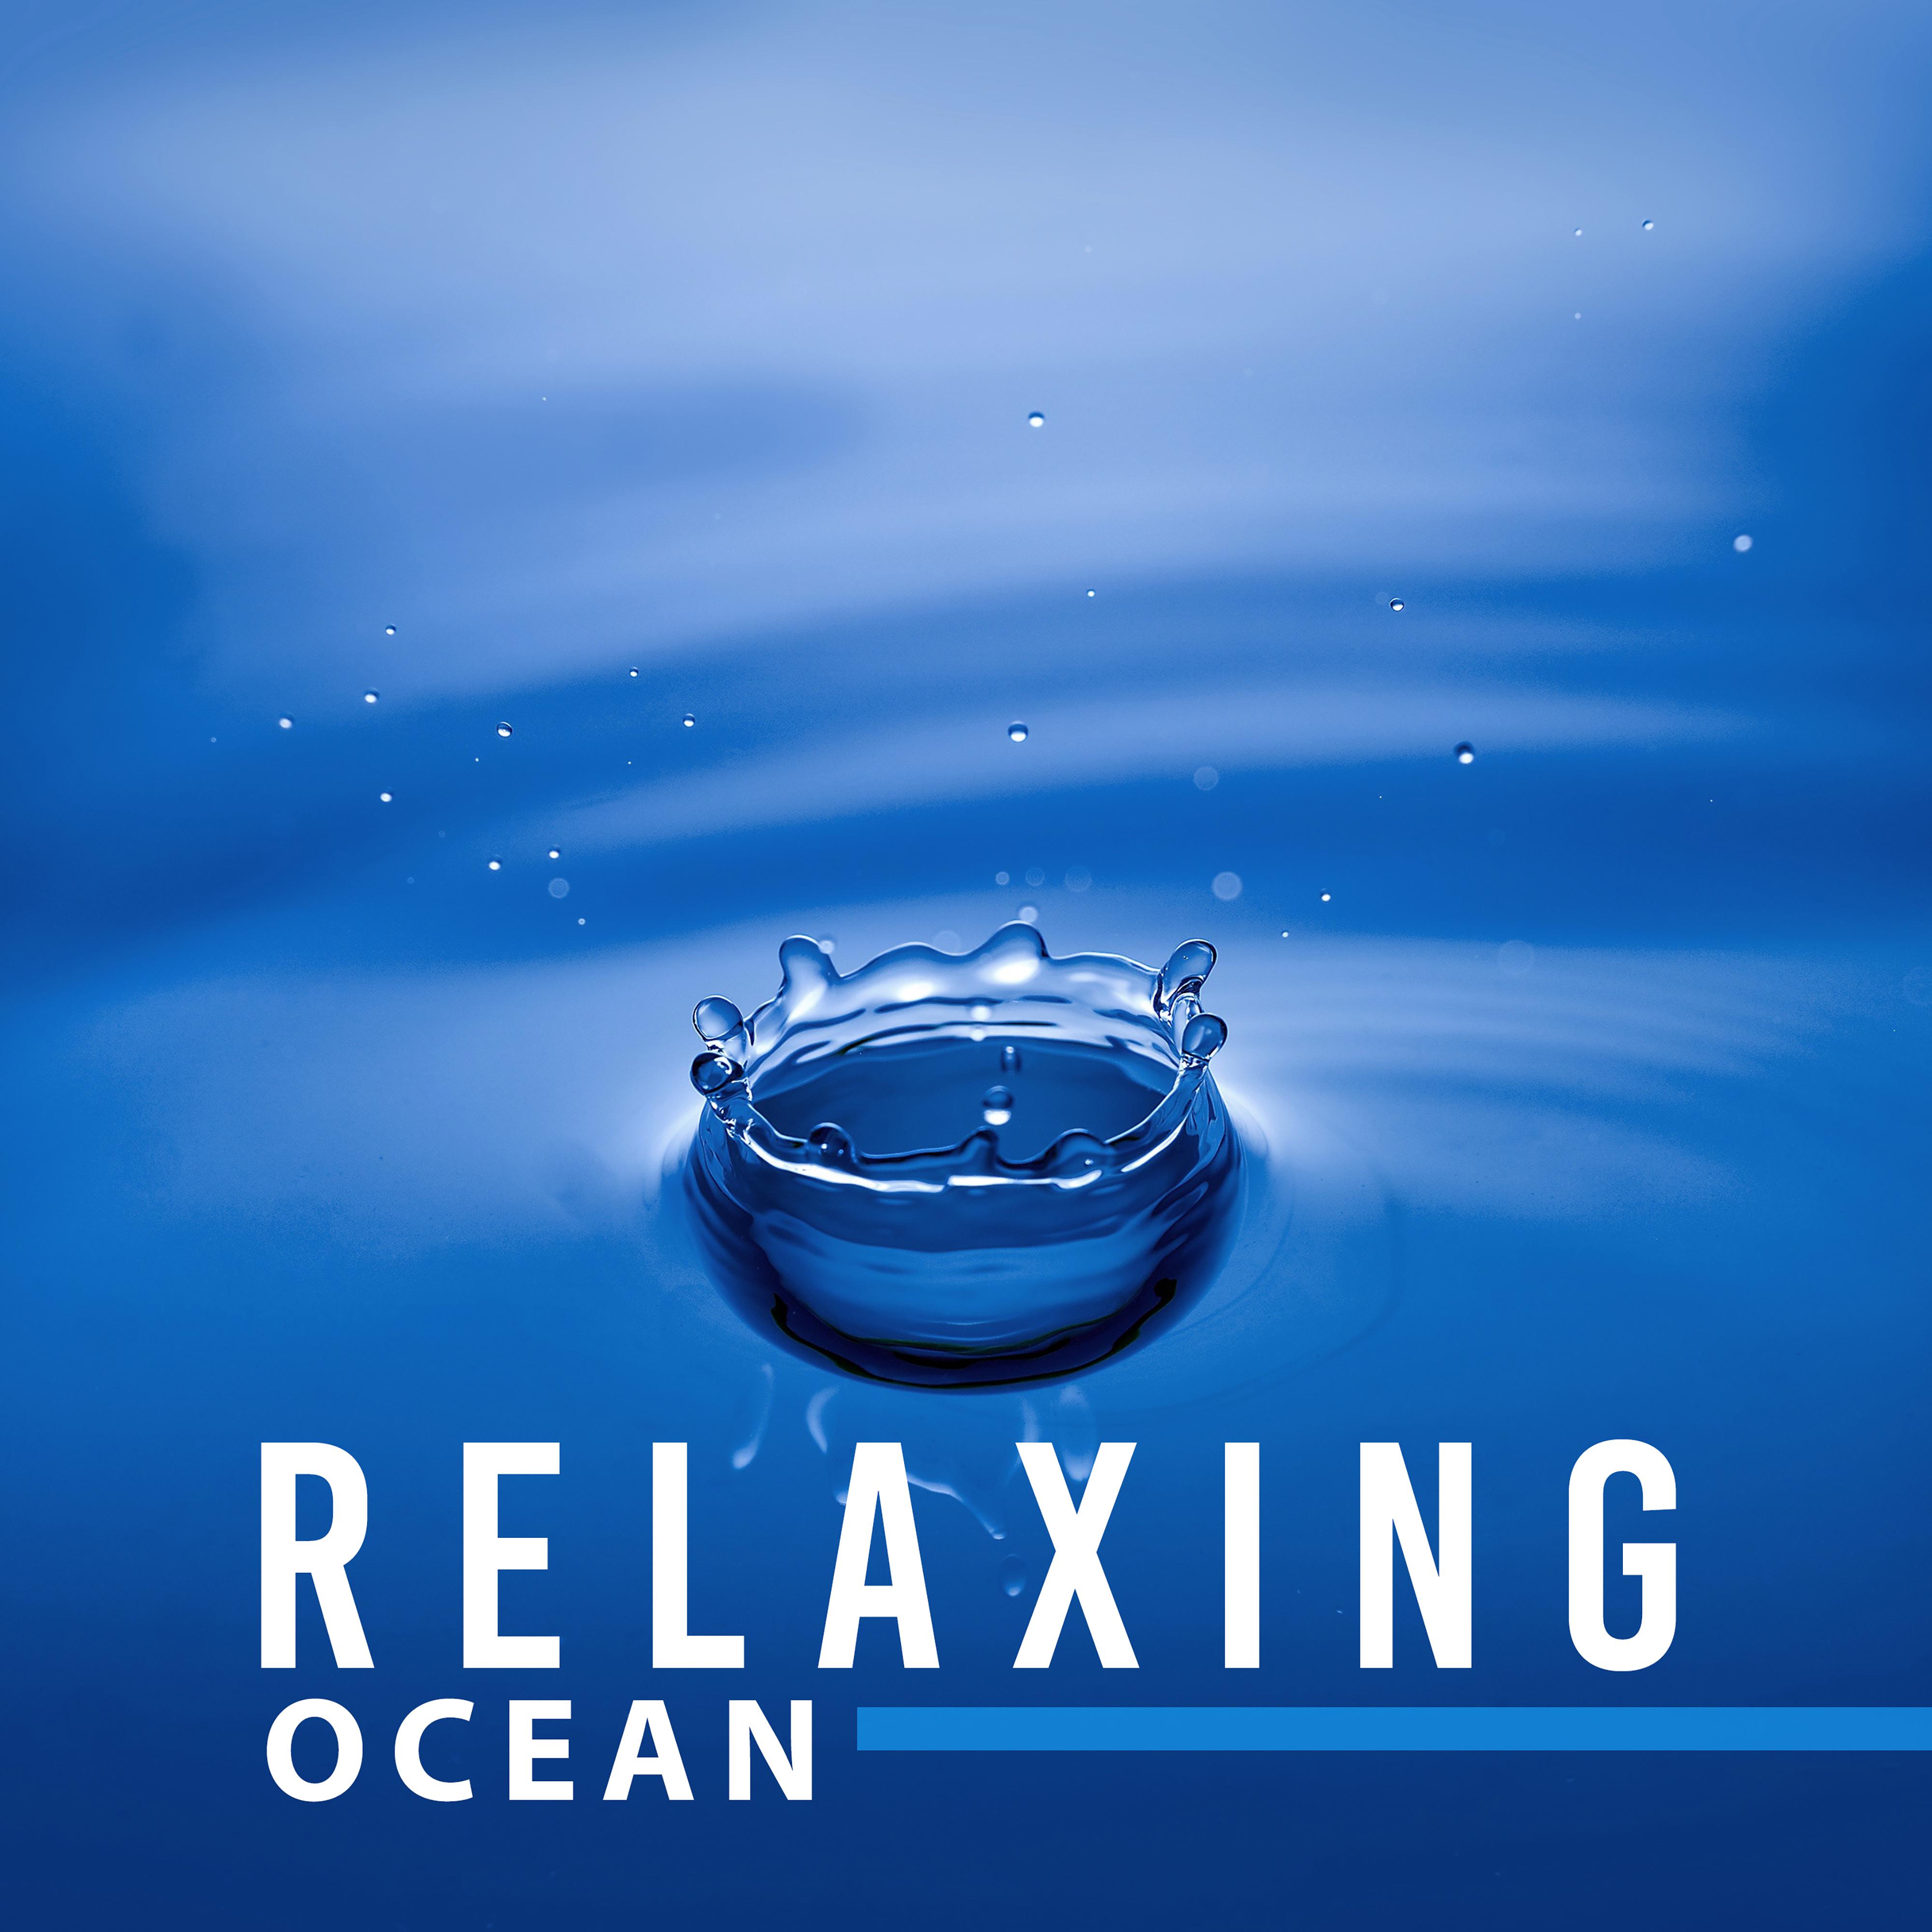 Relaxing Ocean  Soothing New Age Music, Rest a Bit, Soft Sounds, Peaceful Mind